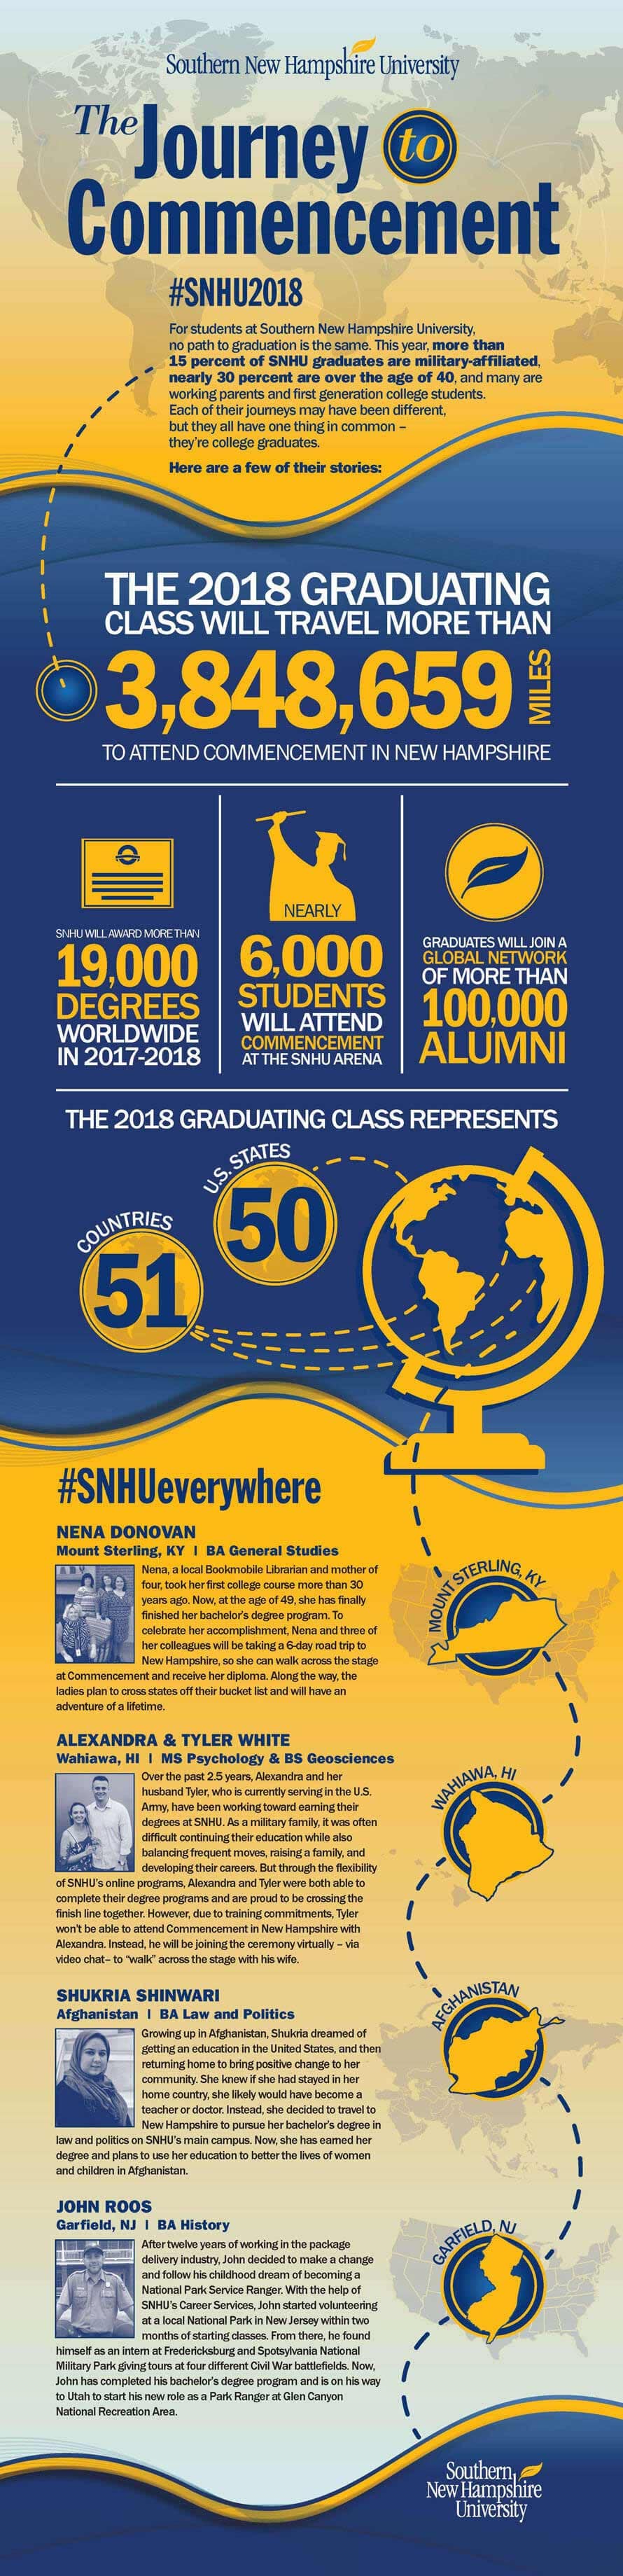 JourneytoCommencementInfographic